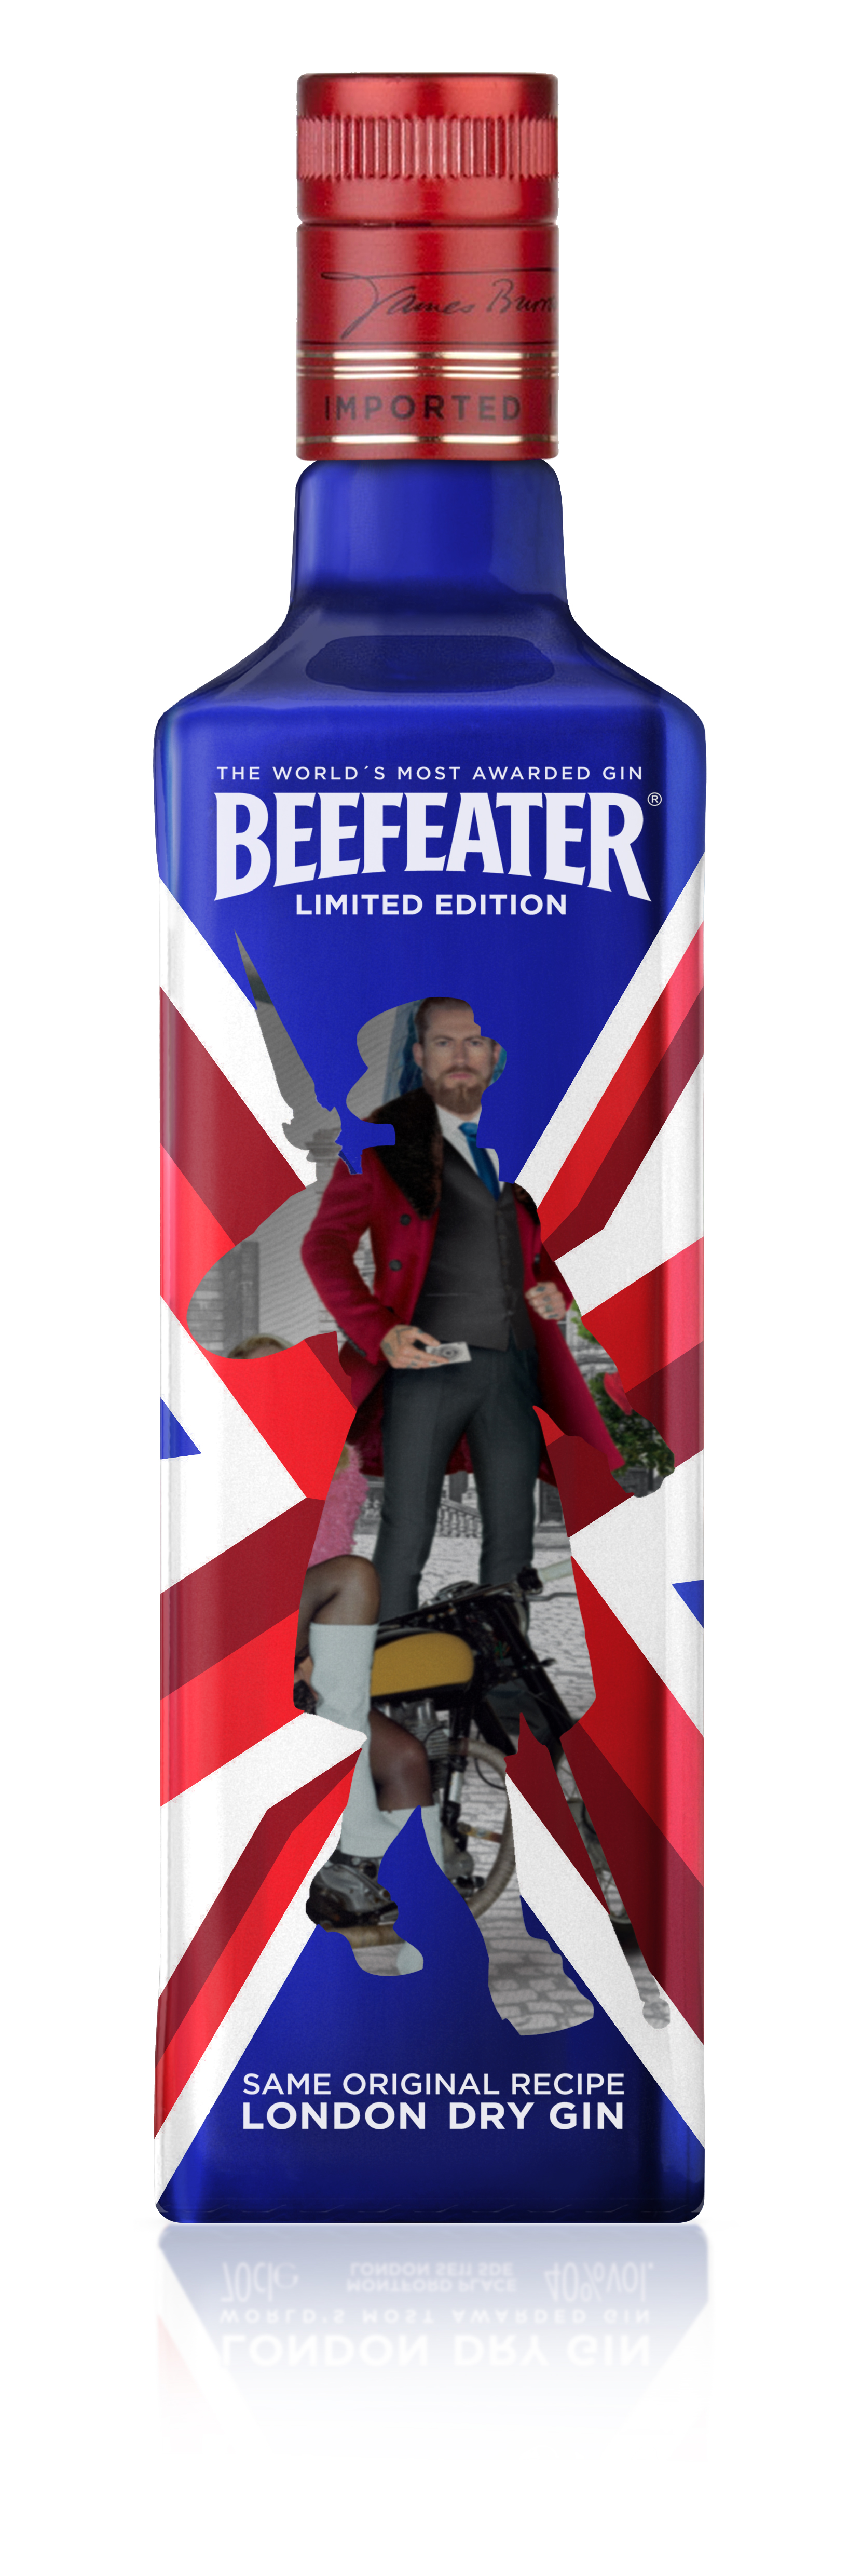 Beefeater London Dry Gin limited edition Spirit of London